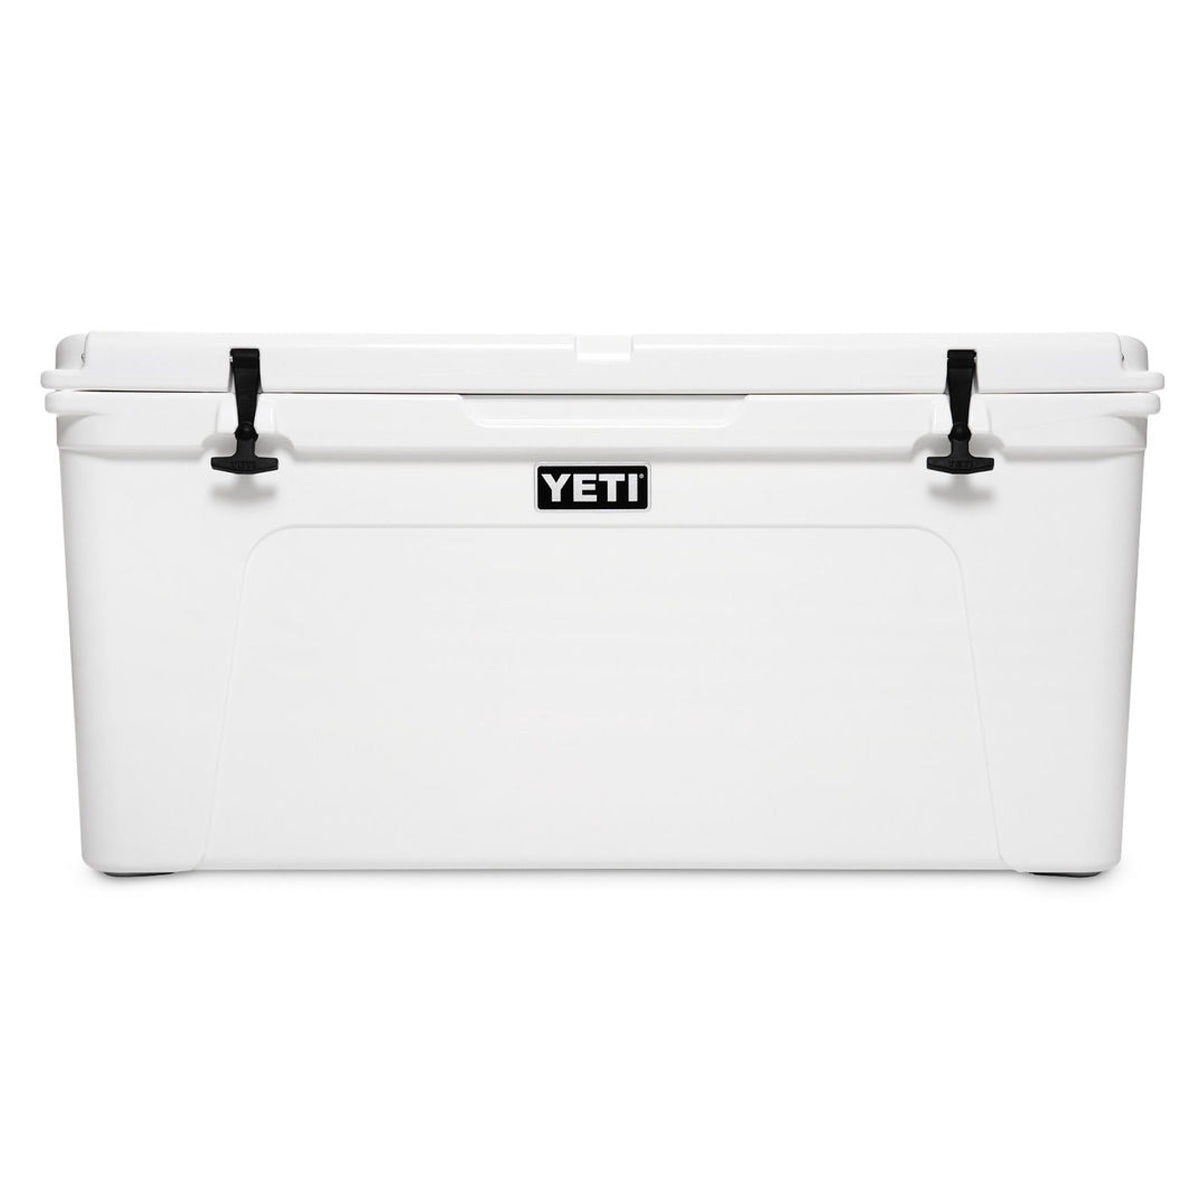 Yeti Tundra 65 Cooler Product Review Ice Blue Dessert Tan White 